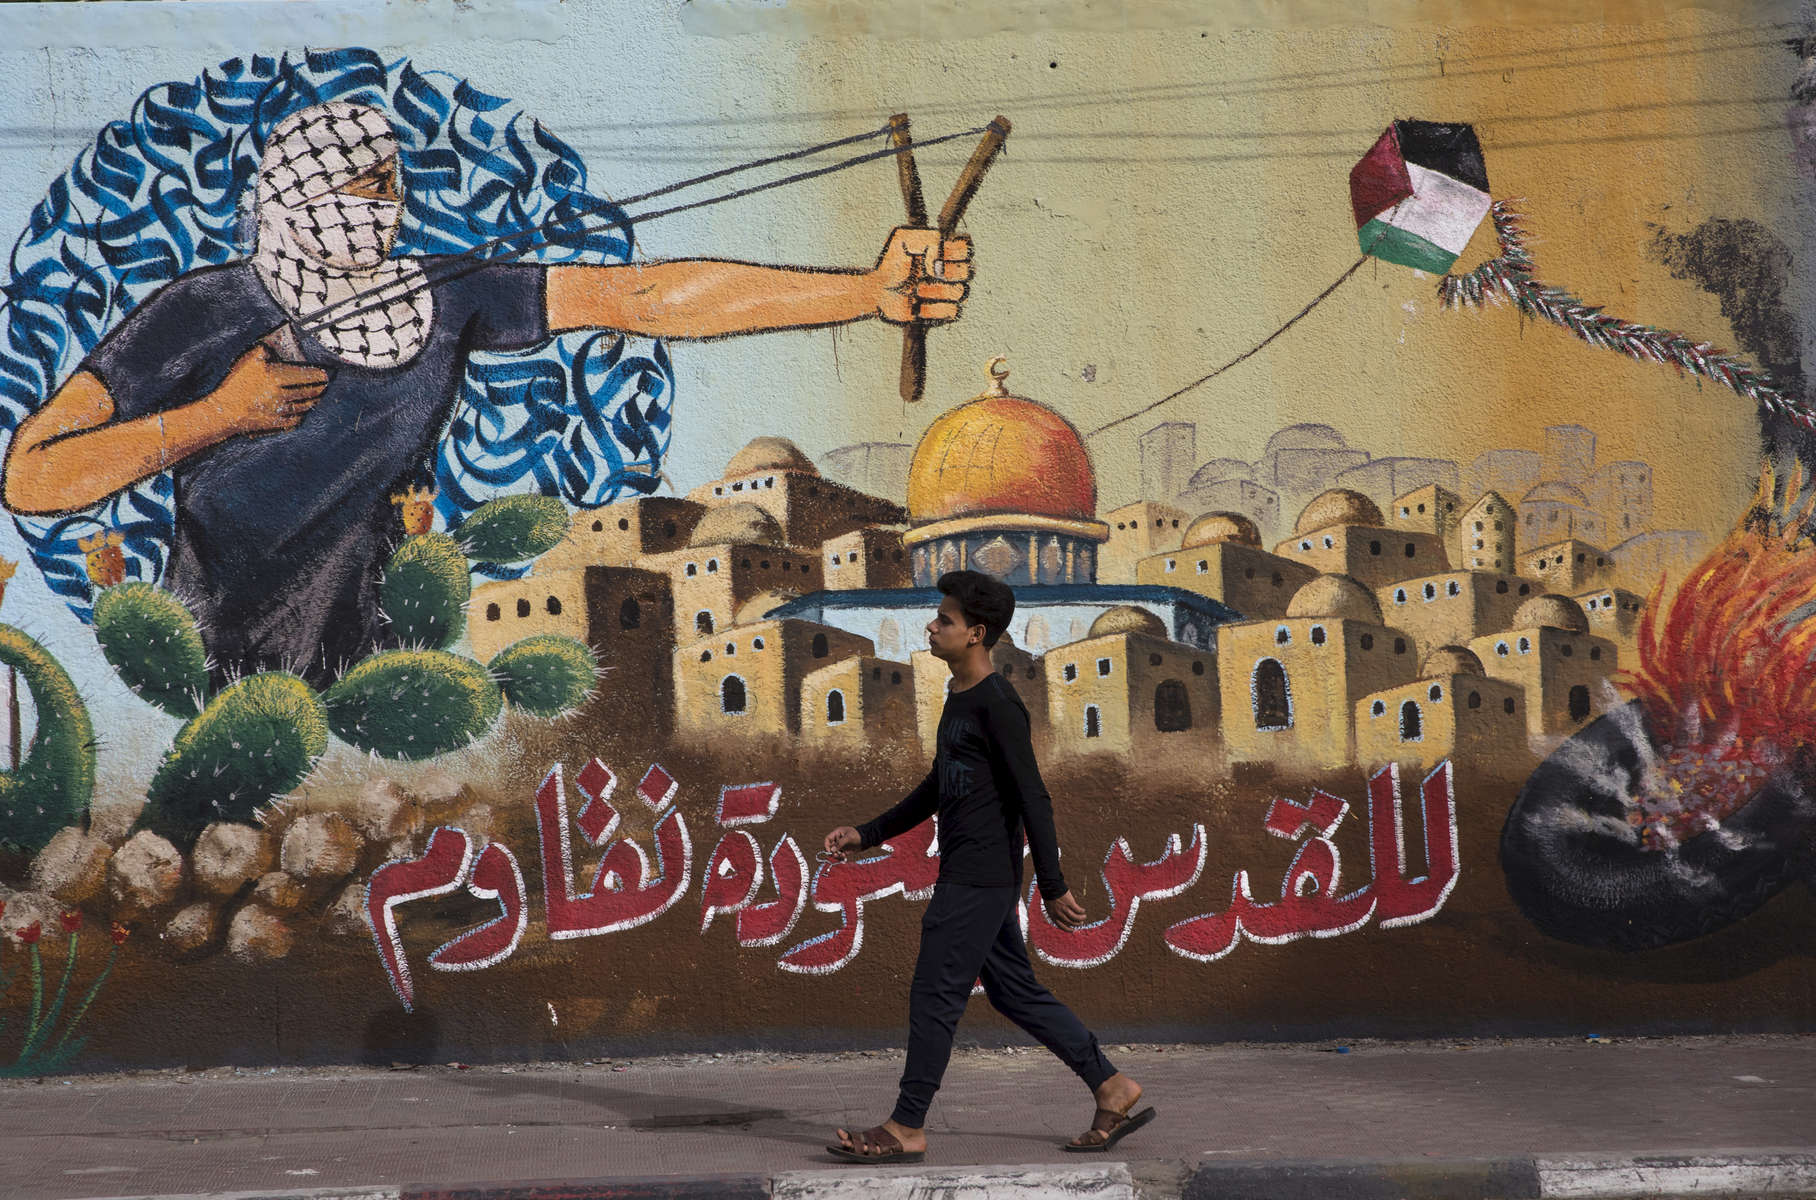 GAZA CITY, GAZA STRIP- MAY 22,2018A man walks by a mural depicting the struggle for freedom May 22,2018 in Gaza city, Gaza strip. The world’s largest open air prison along the Israel-Gaza border. Everyone is well aware that Gaza's two million inhabitants are trapped in a cycle of violence and poverty, created by policies and political decisions on both sides. The problems and complications affecting Gaza today are overwhelming. The world, seemingly accustomed to the suffering of the Gazan people turns a blind eye. (Photo by Paula Bronstein ) 